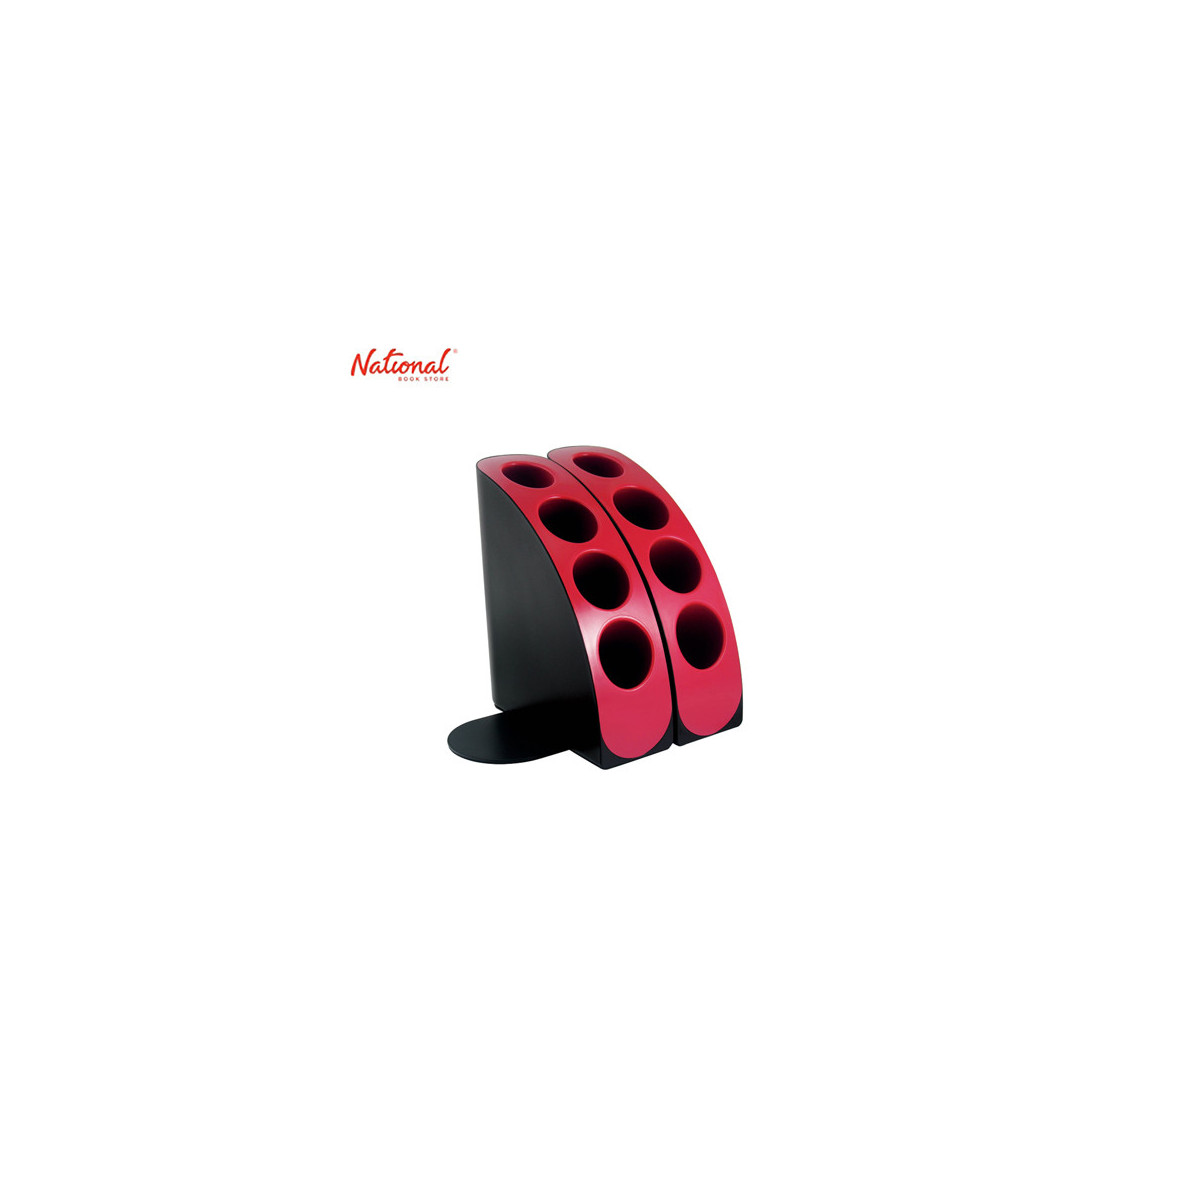 Olife Desk Organizer S-833-04 Black And Red 60x60x180mm Smart Series